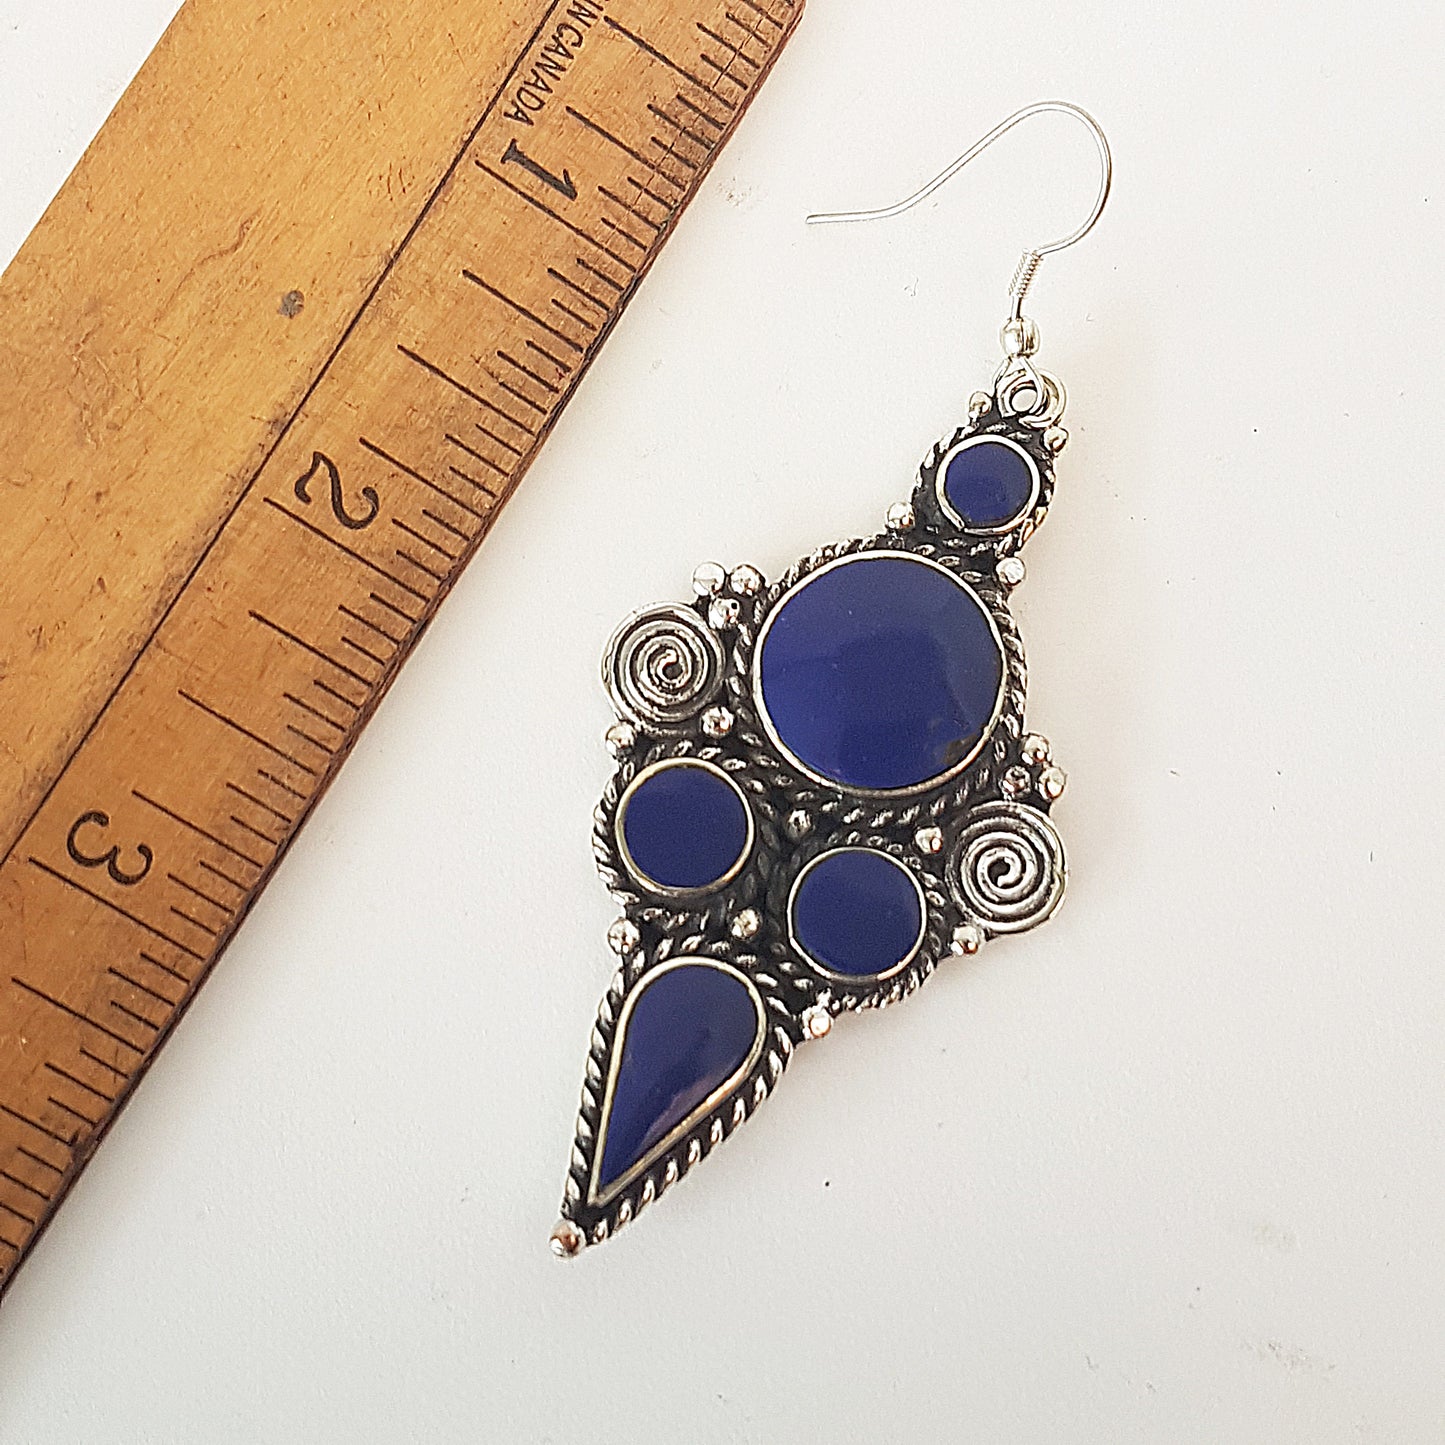 Silver earrings with 5 Lapis flat inlay stones. Large 3 inch length.